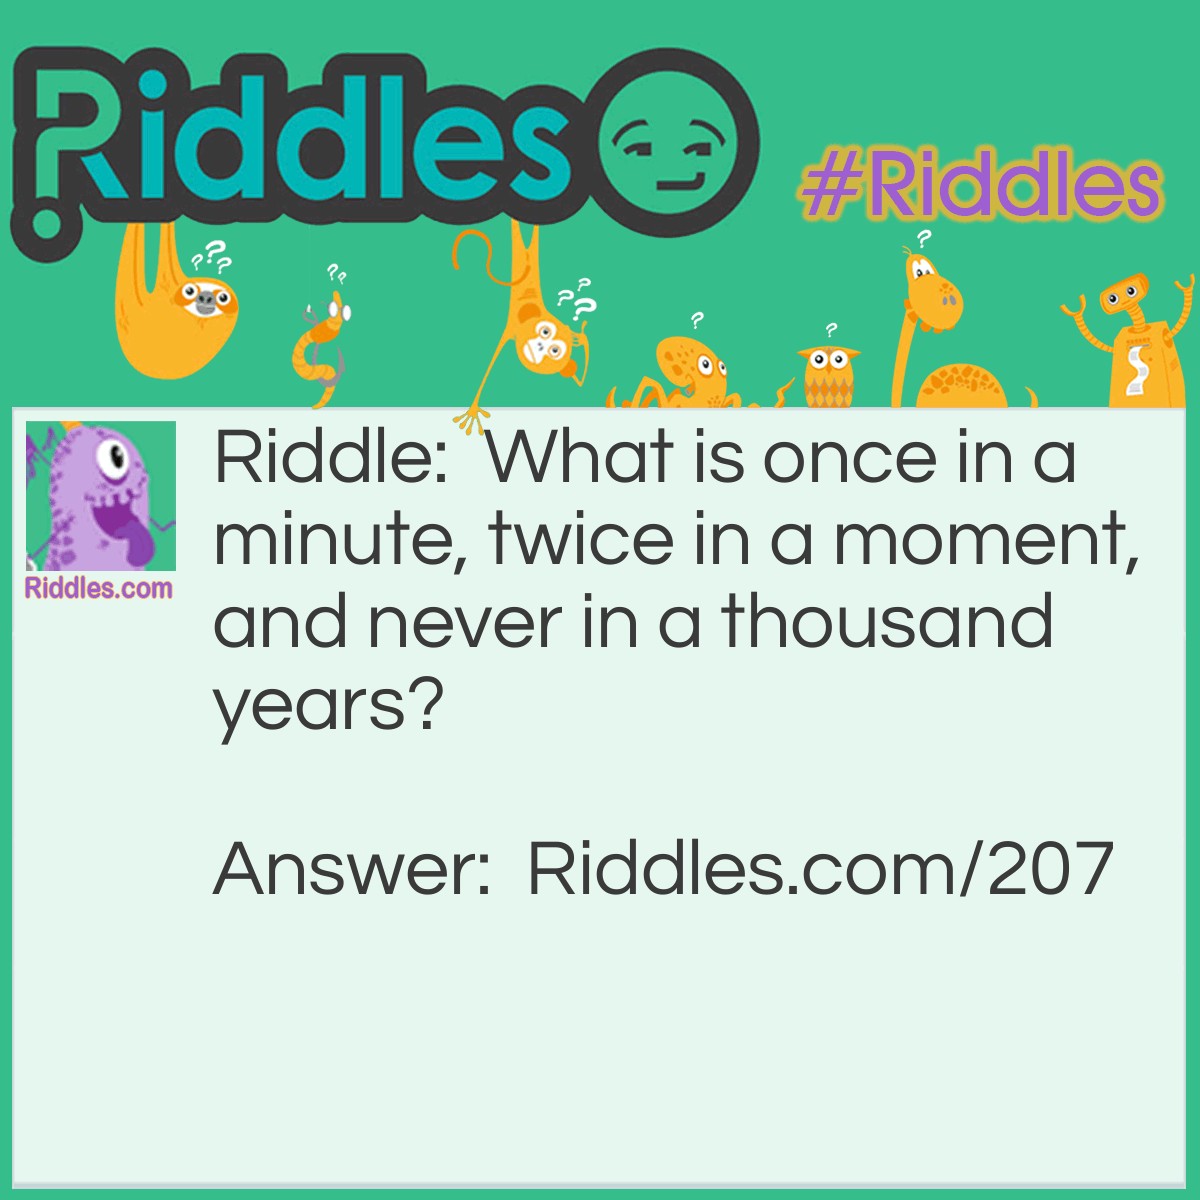 Riddle: What is once in a minute, twice in a moment, and never in a thousand years? Answer: The letter M.